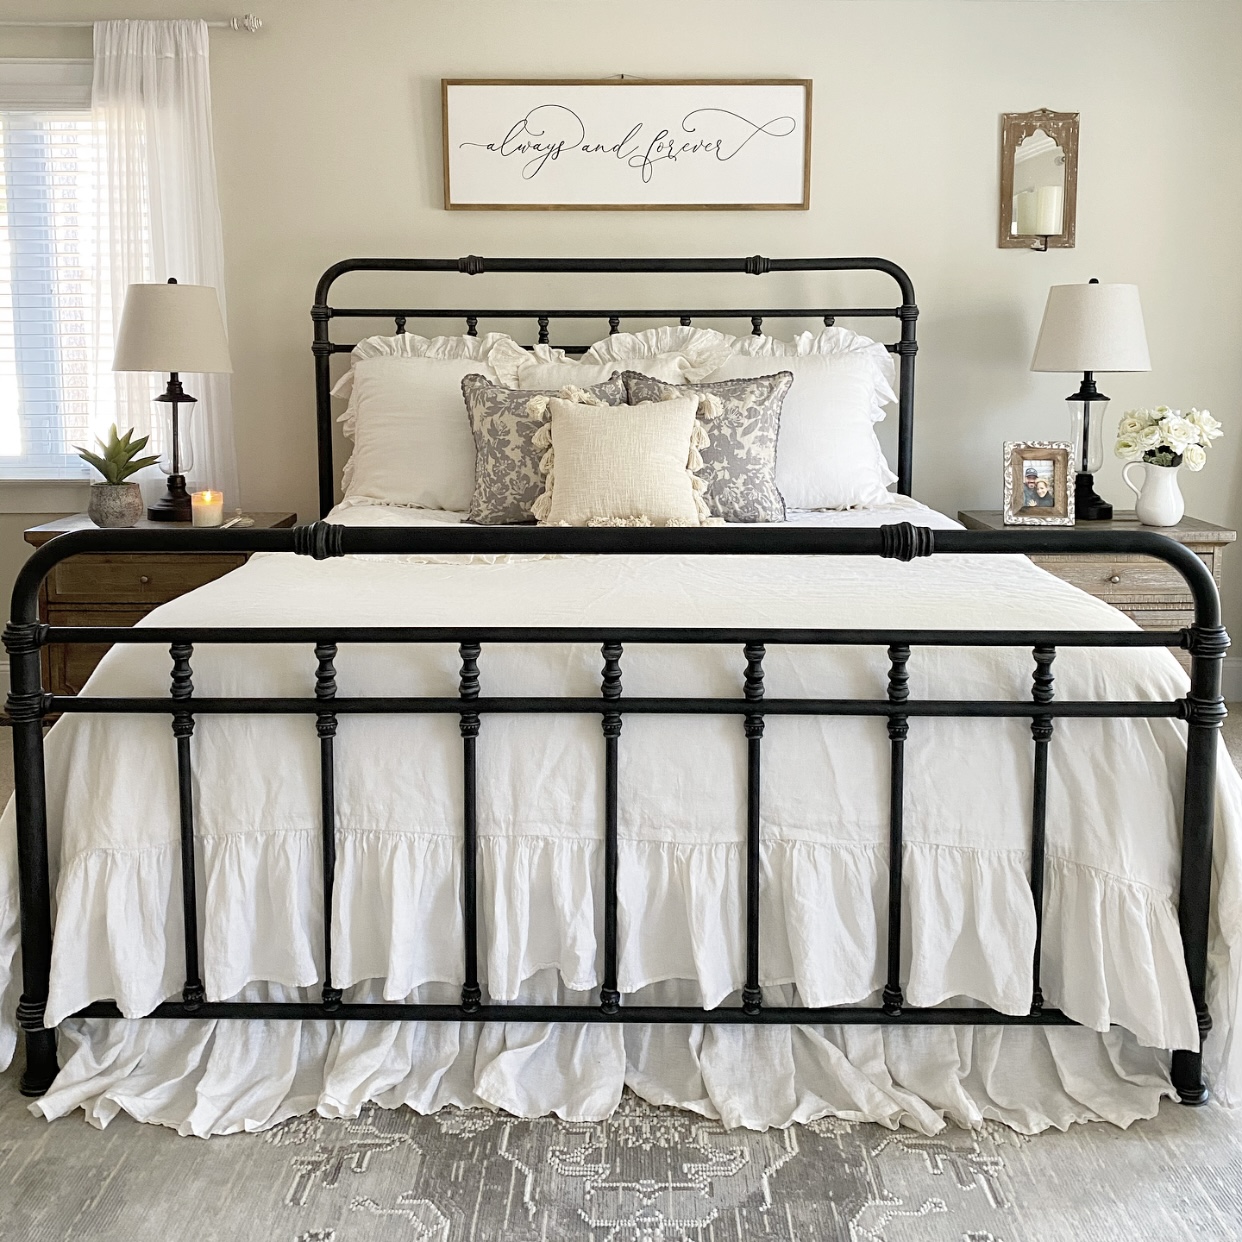 Bedroom view with white bedding on an iron bed and nightstands with the perfect bedside essentials.